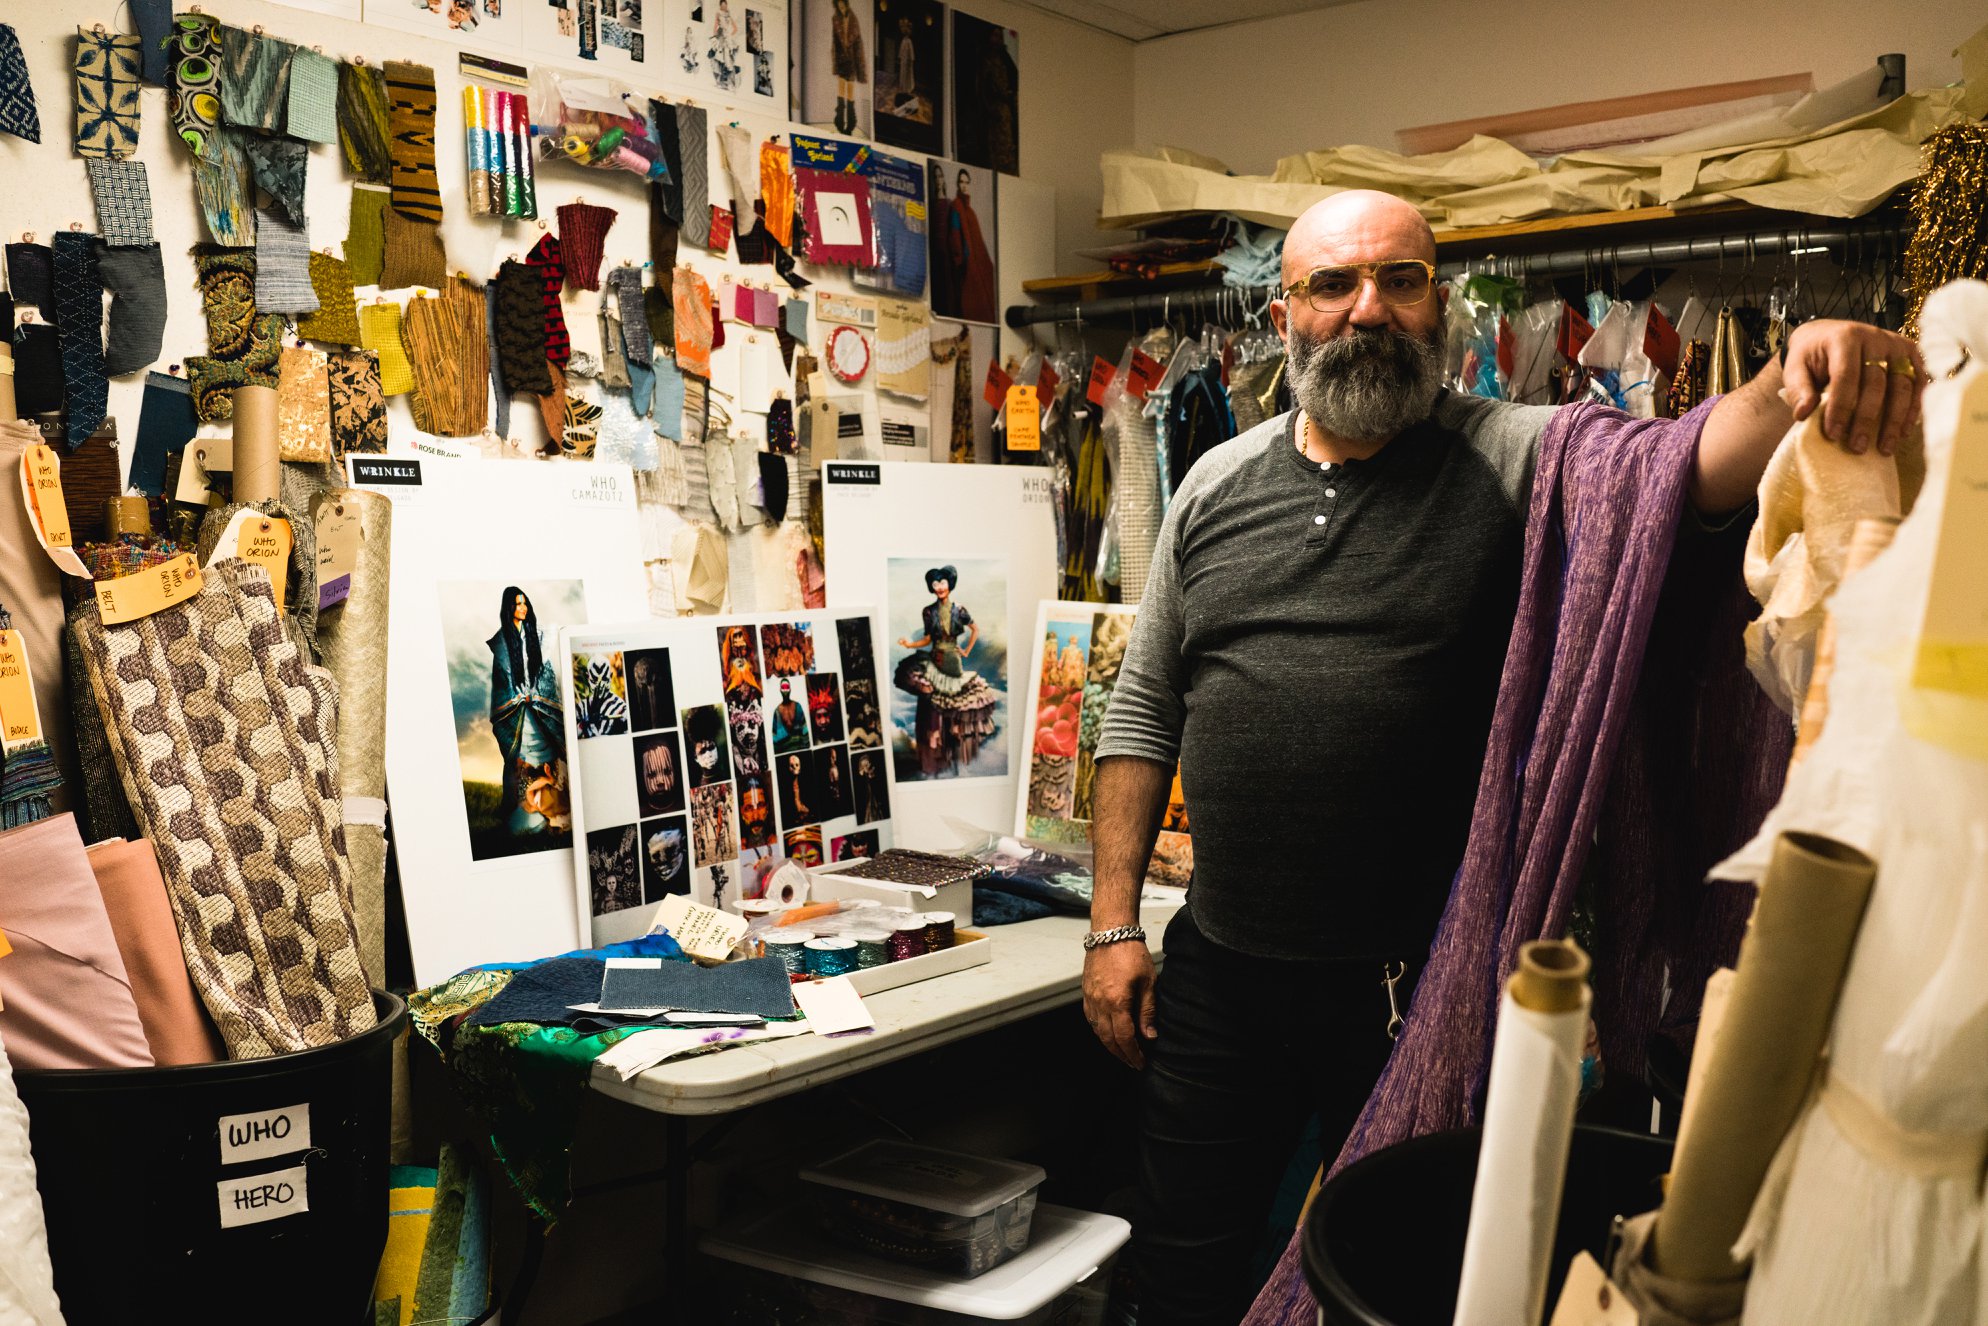 Paco Delgado On Creating The Costumes for A Wrinkle In Time